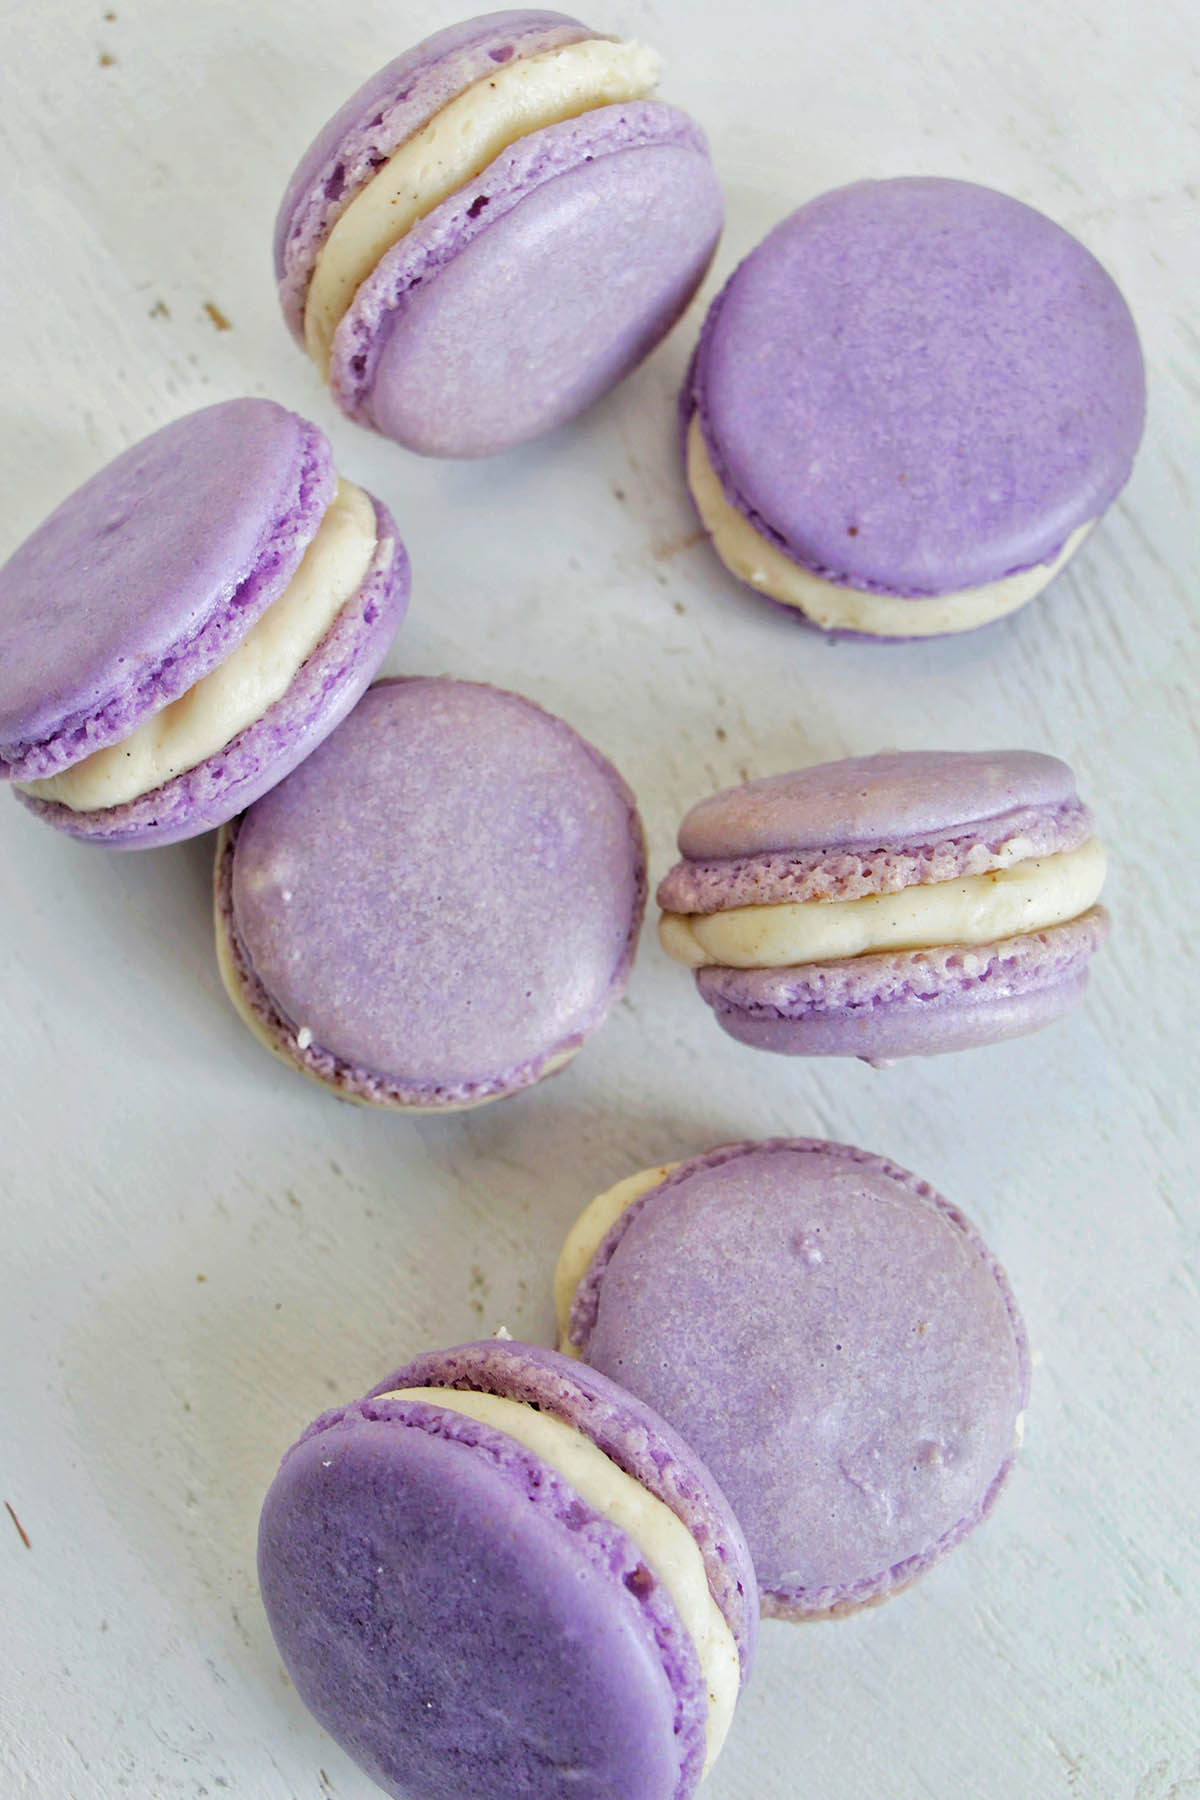 purple macarons filled with vanilla buttercream filling.